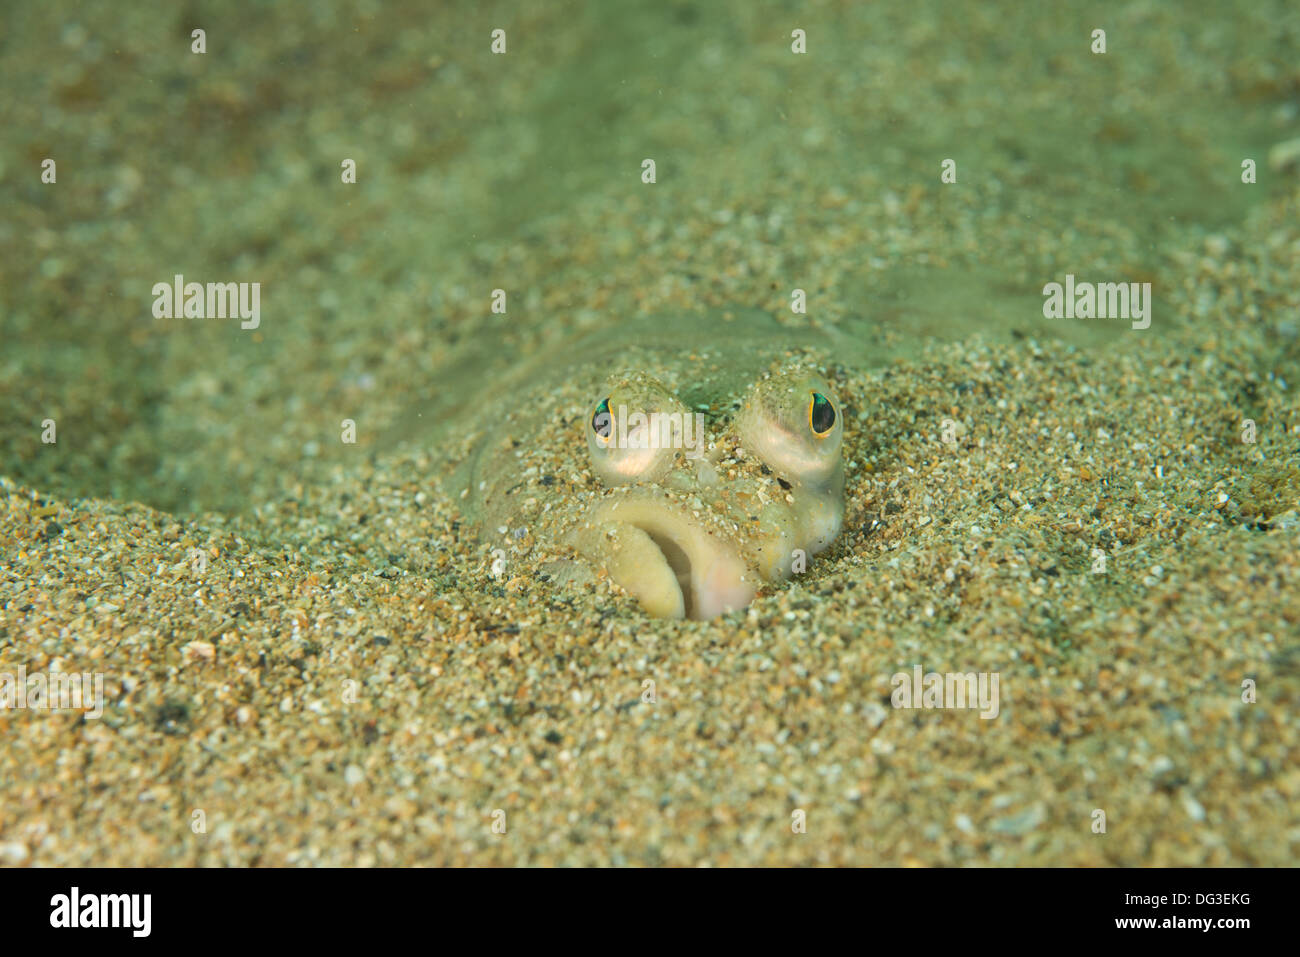 Plaice hiding, partially covered by sand. Stock Photo